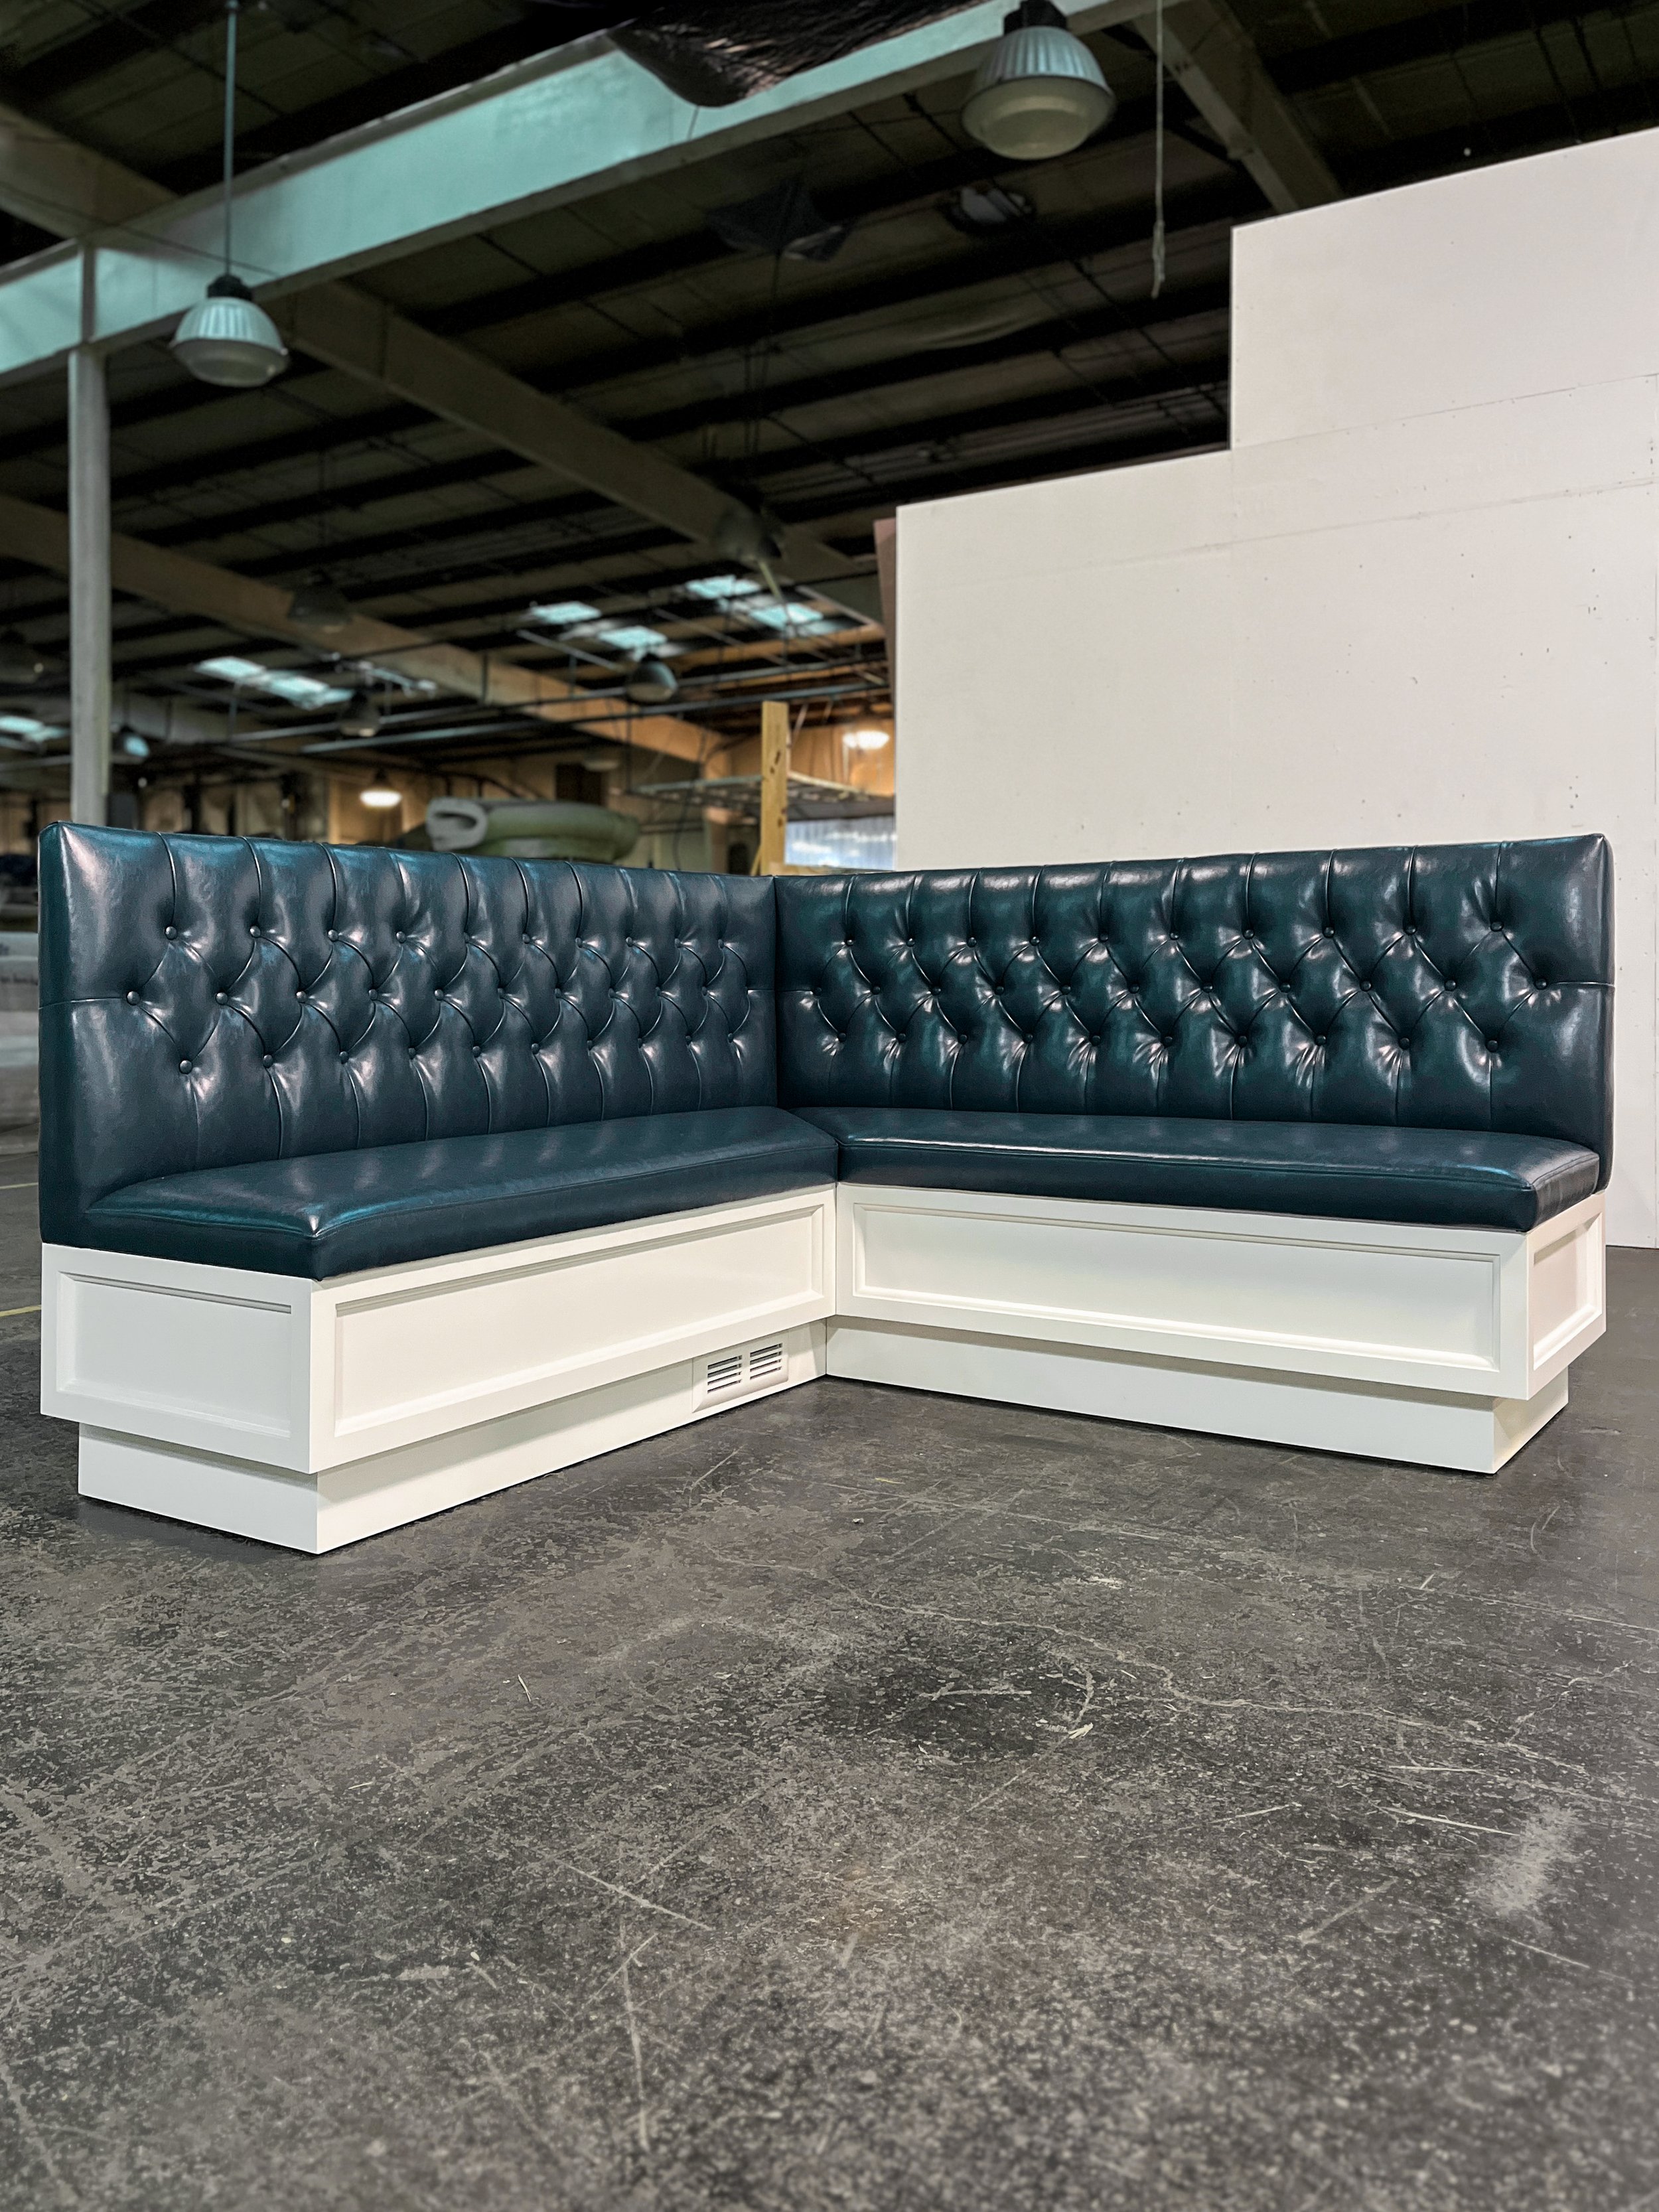 Navy Blue Diamond Tufted Banquette with Shaker style white base.